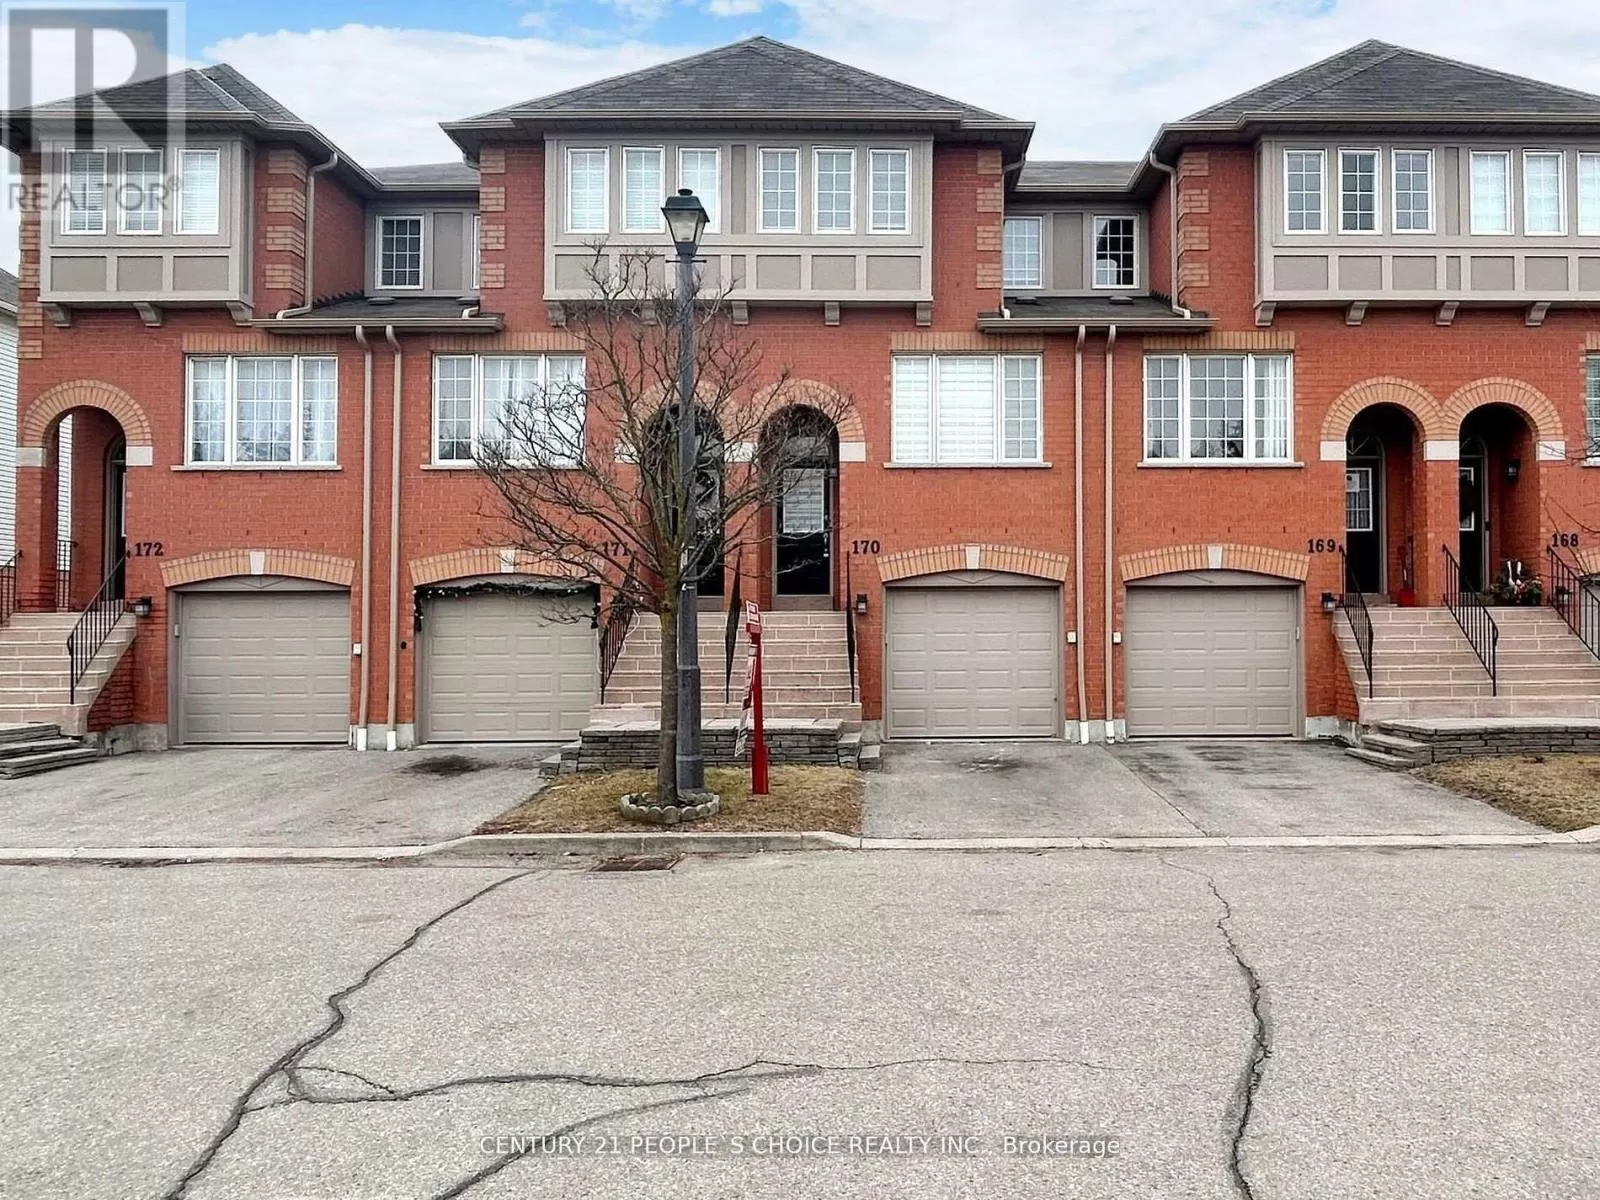 Row / Townhouse for rent: #170 -5030 Heatherleigh Ave, Mississauga, Ontario L5V 2G7